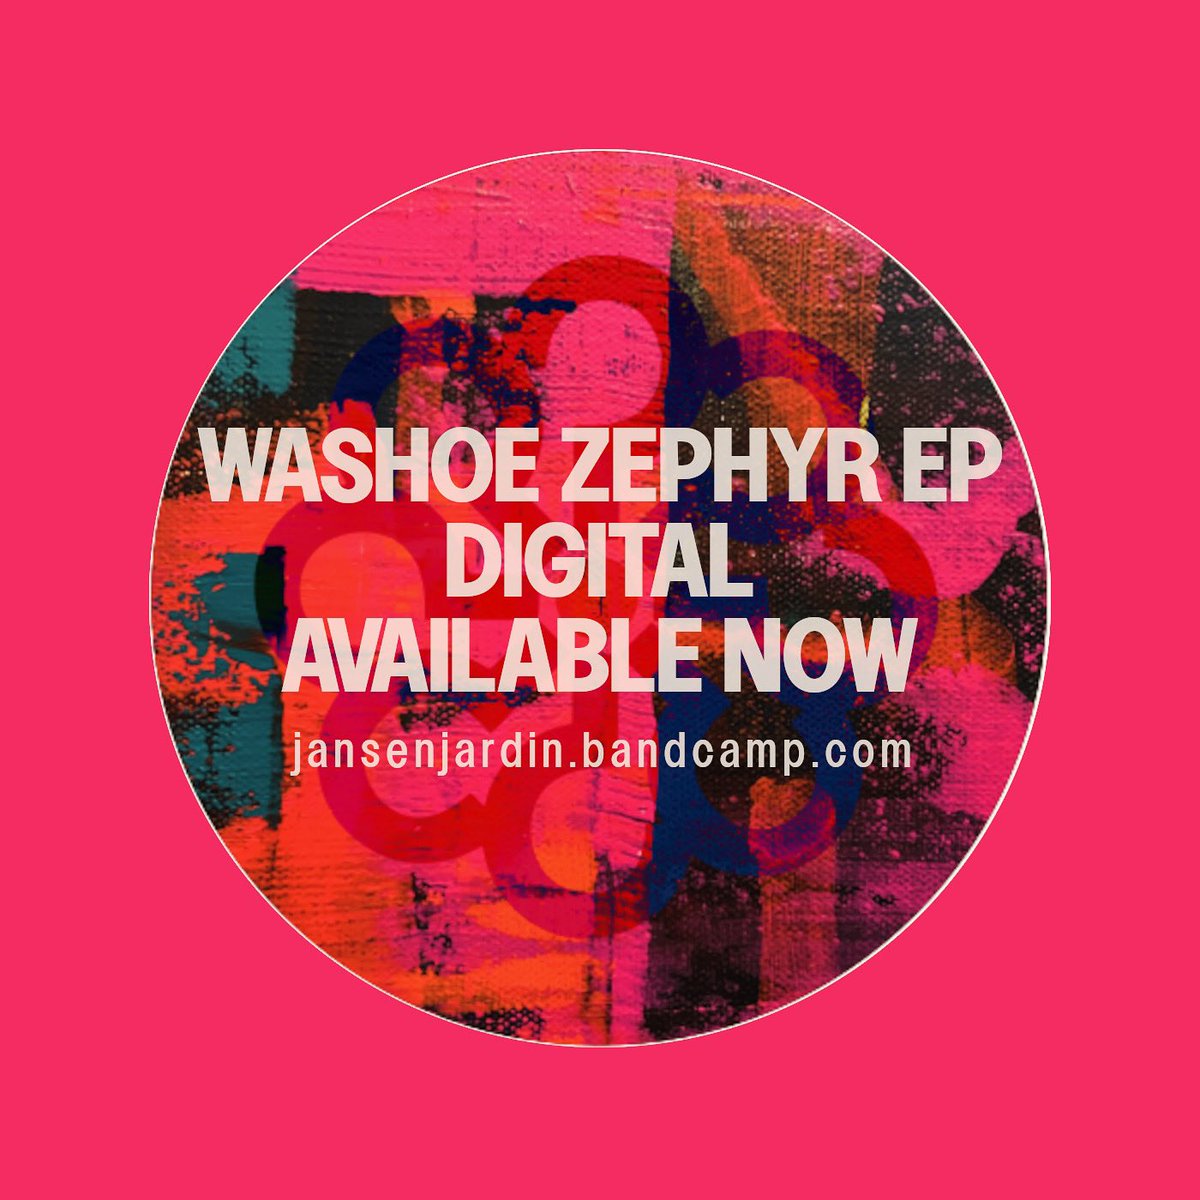 Washoe Zephyr EP digital available now (link in bio)!